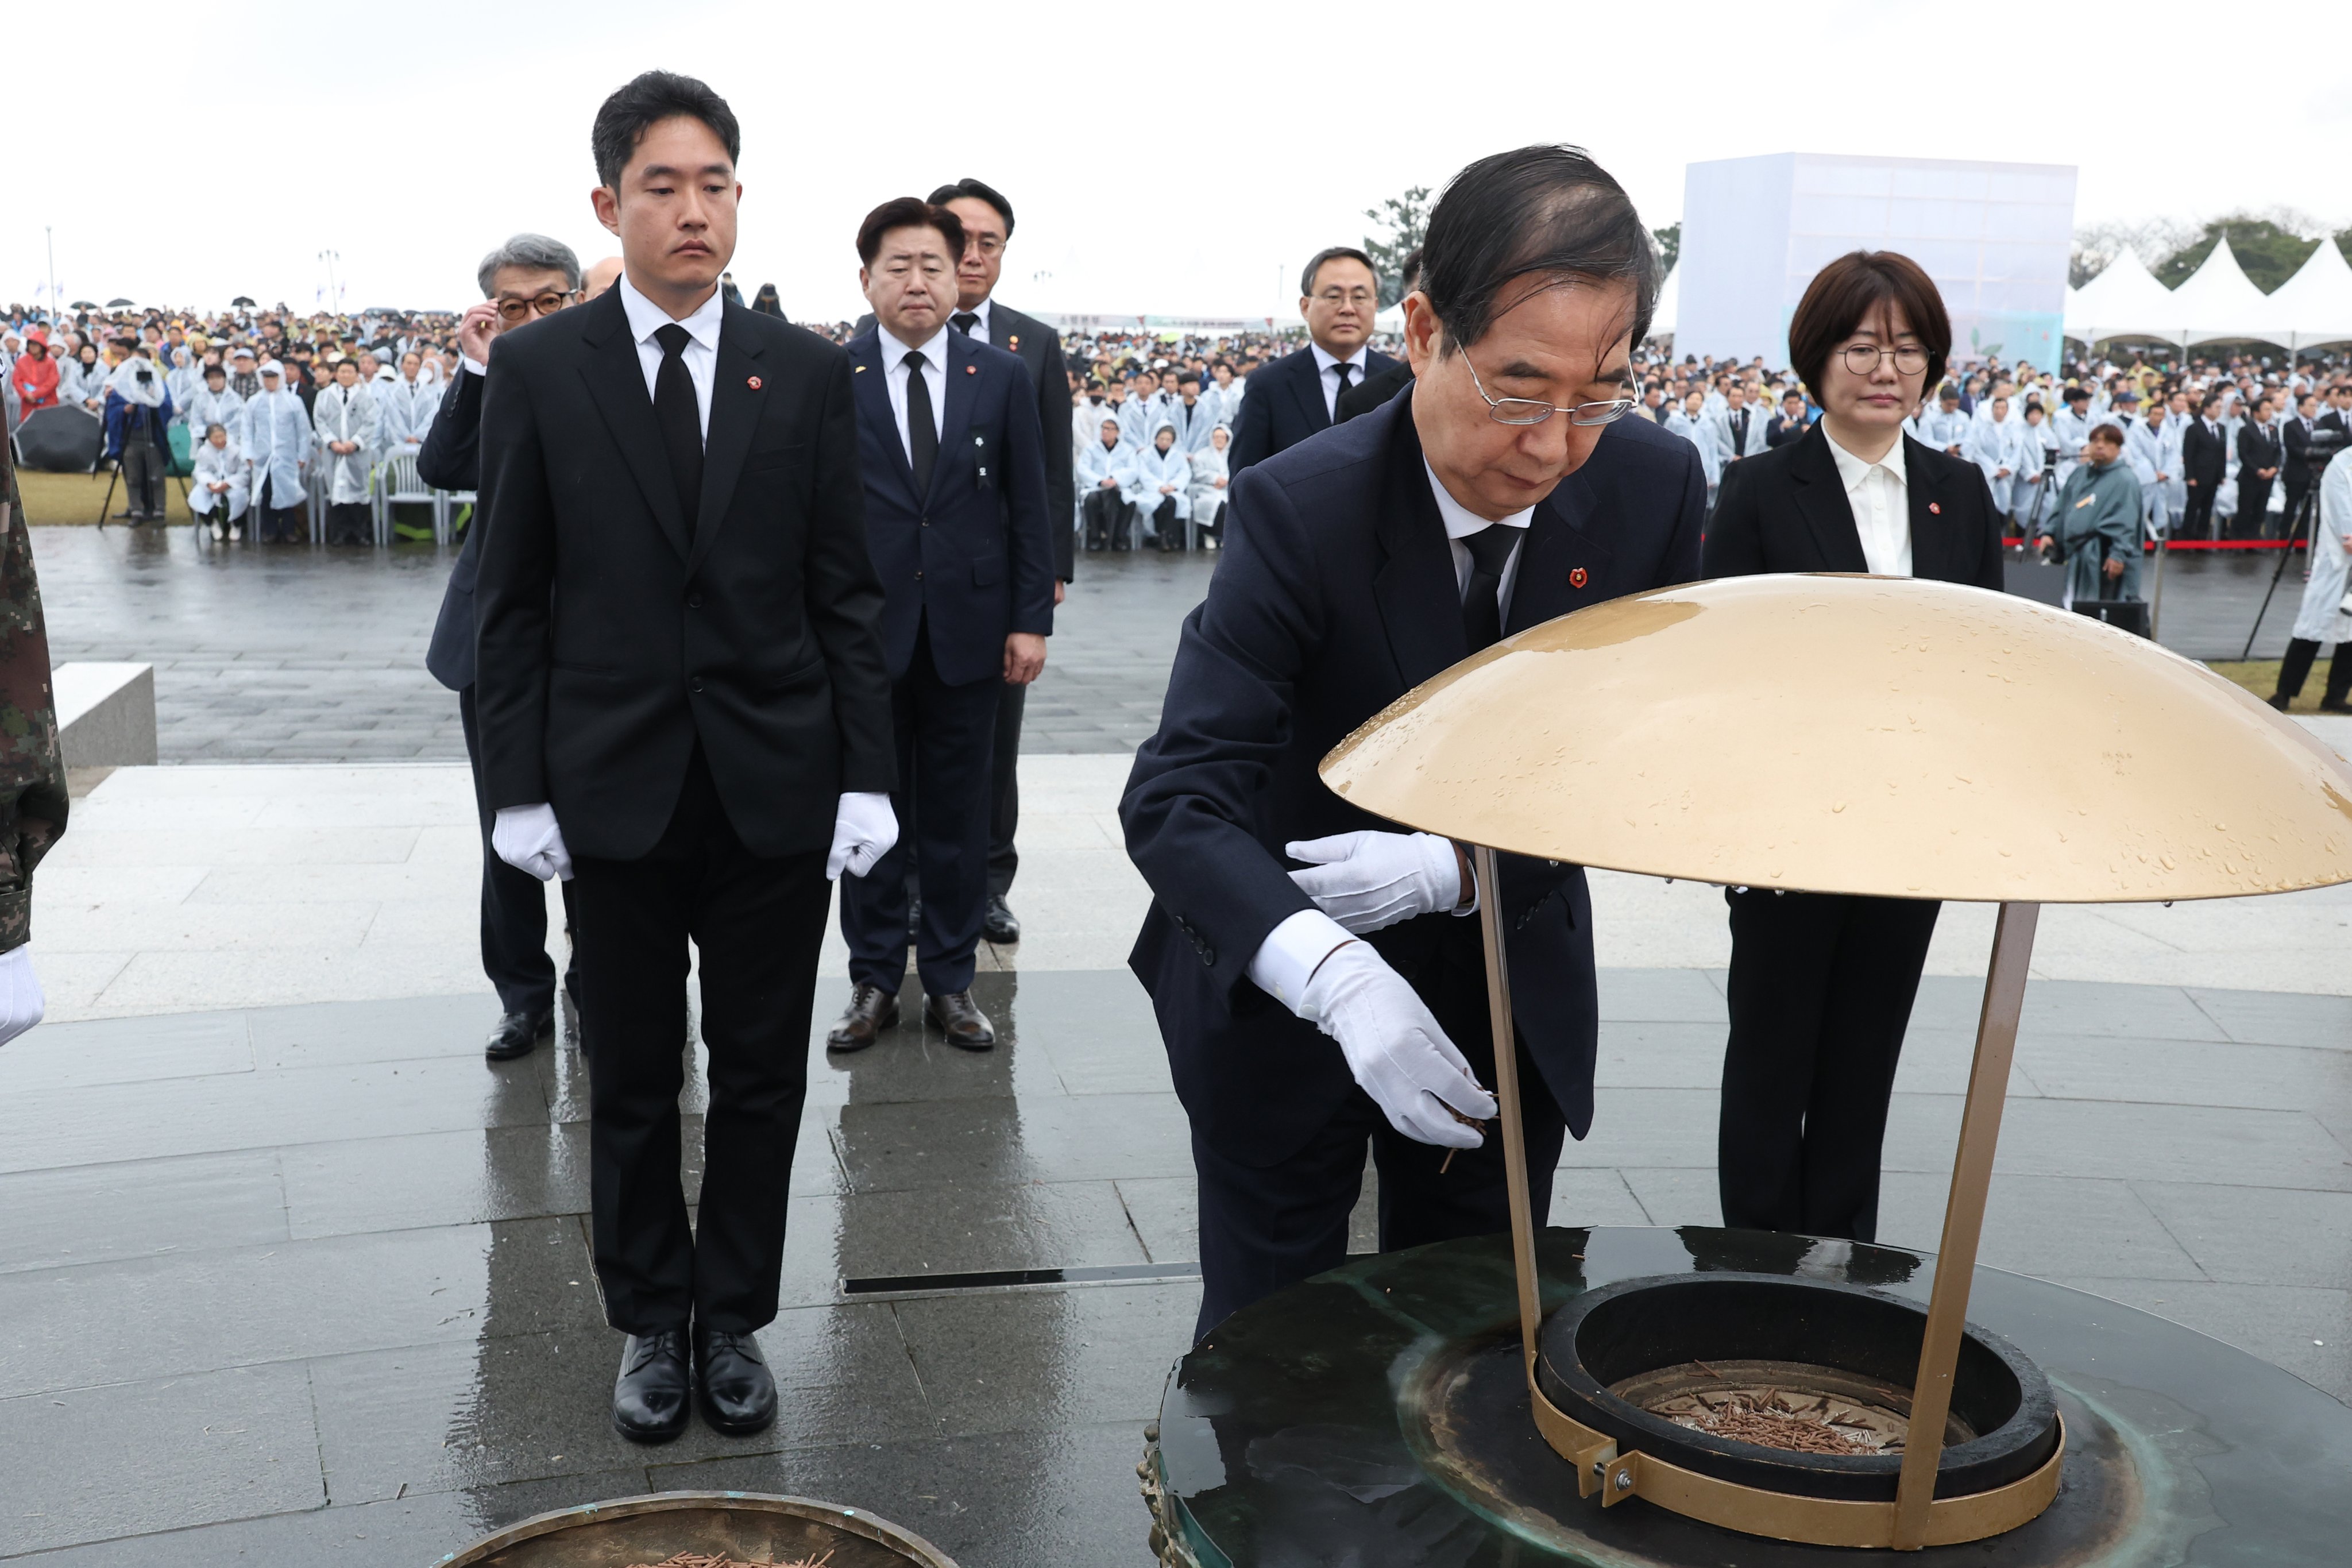 South Korean Prime Minister Han Duck-soo, front, offers incense during a ceremony paying tribute to the victims of the April 3 Jeju Uprising at the Peace Park on Jeju island, South Korea, on April 3. The incident refers to a series of pro-communist uprisings and a counterinsurgency that occurred between 1948 and 1954 on the island, which resulted in the deaths of tens of thousands of innocent citizens. Photo: EPA-EFE